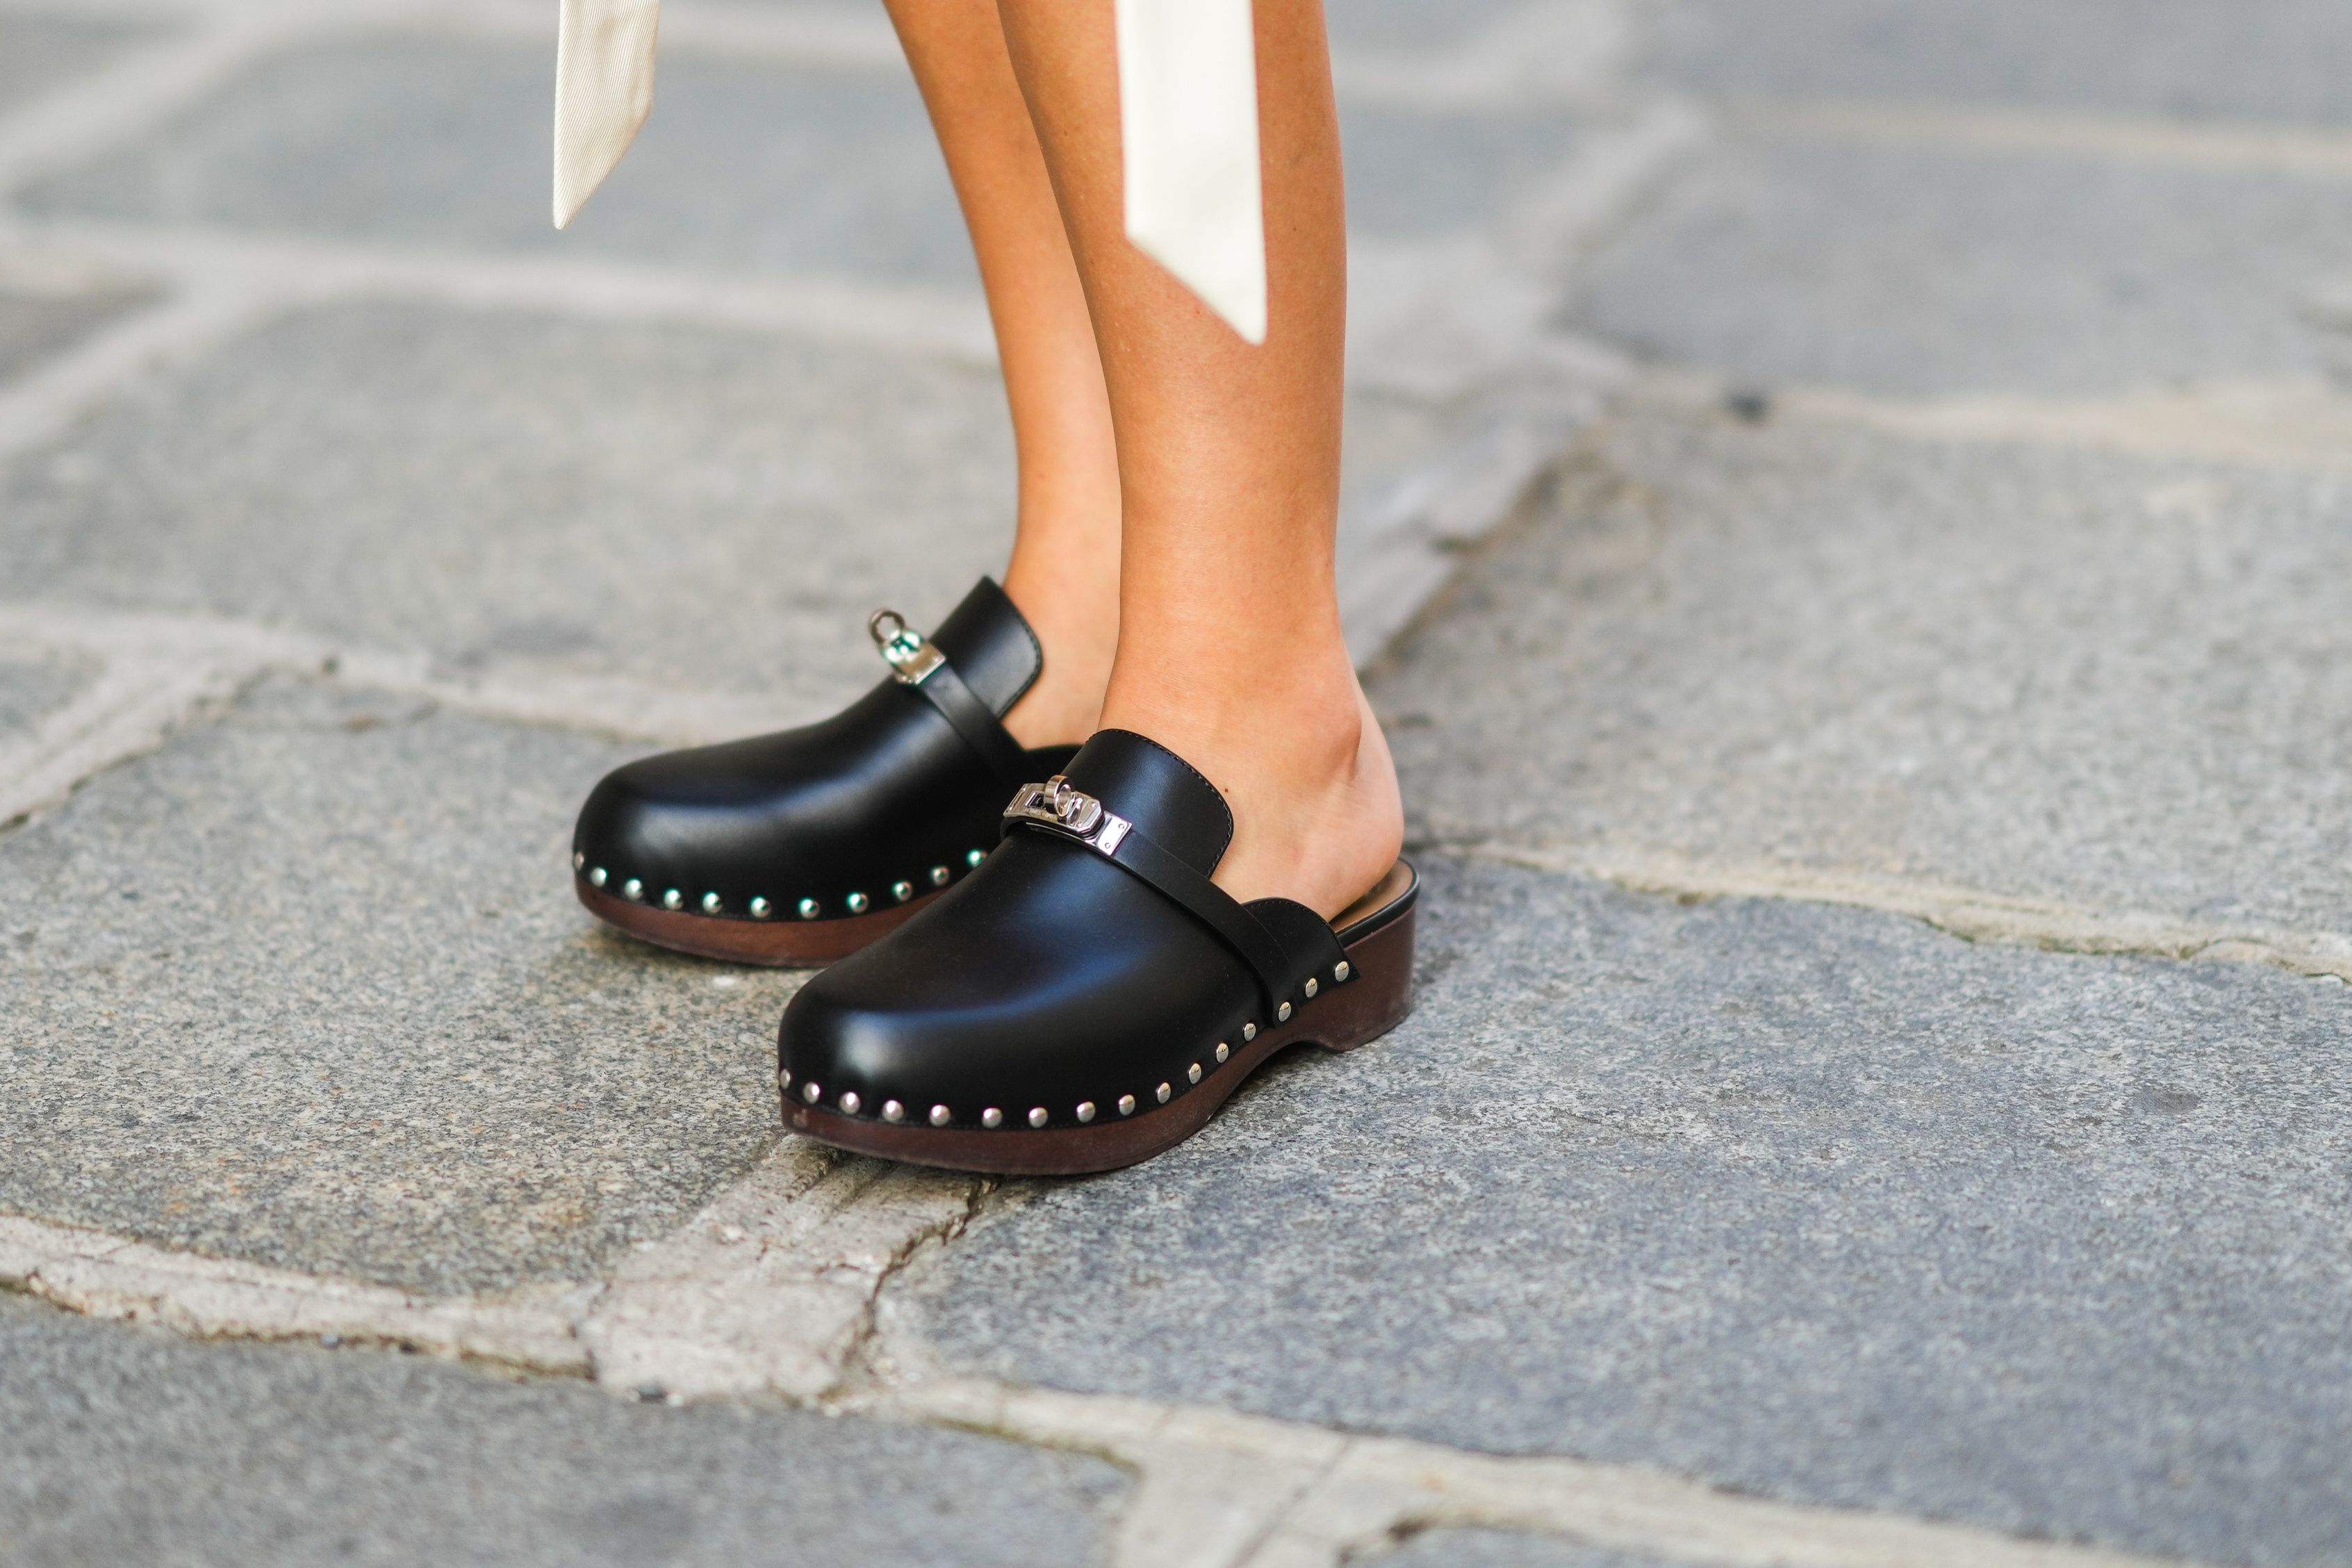 TikTok Is Freaking Out About These $40 Clogs from Target